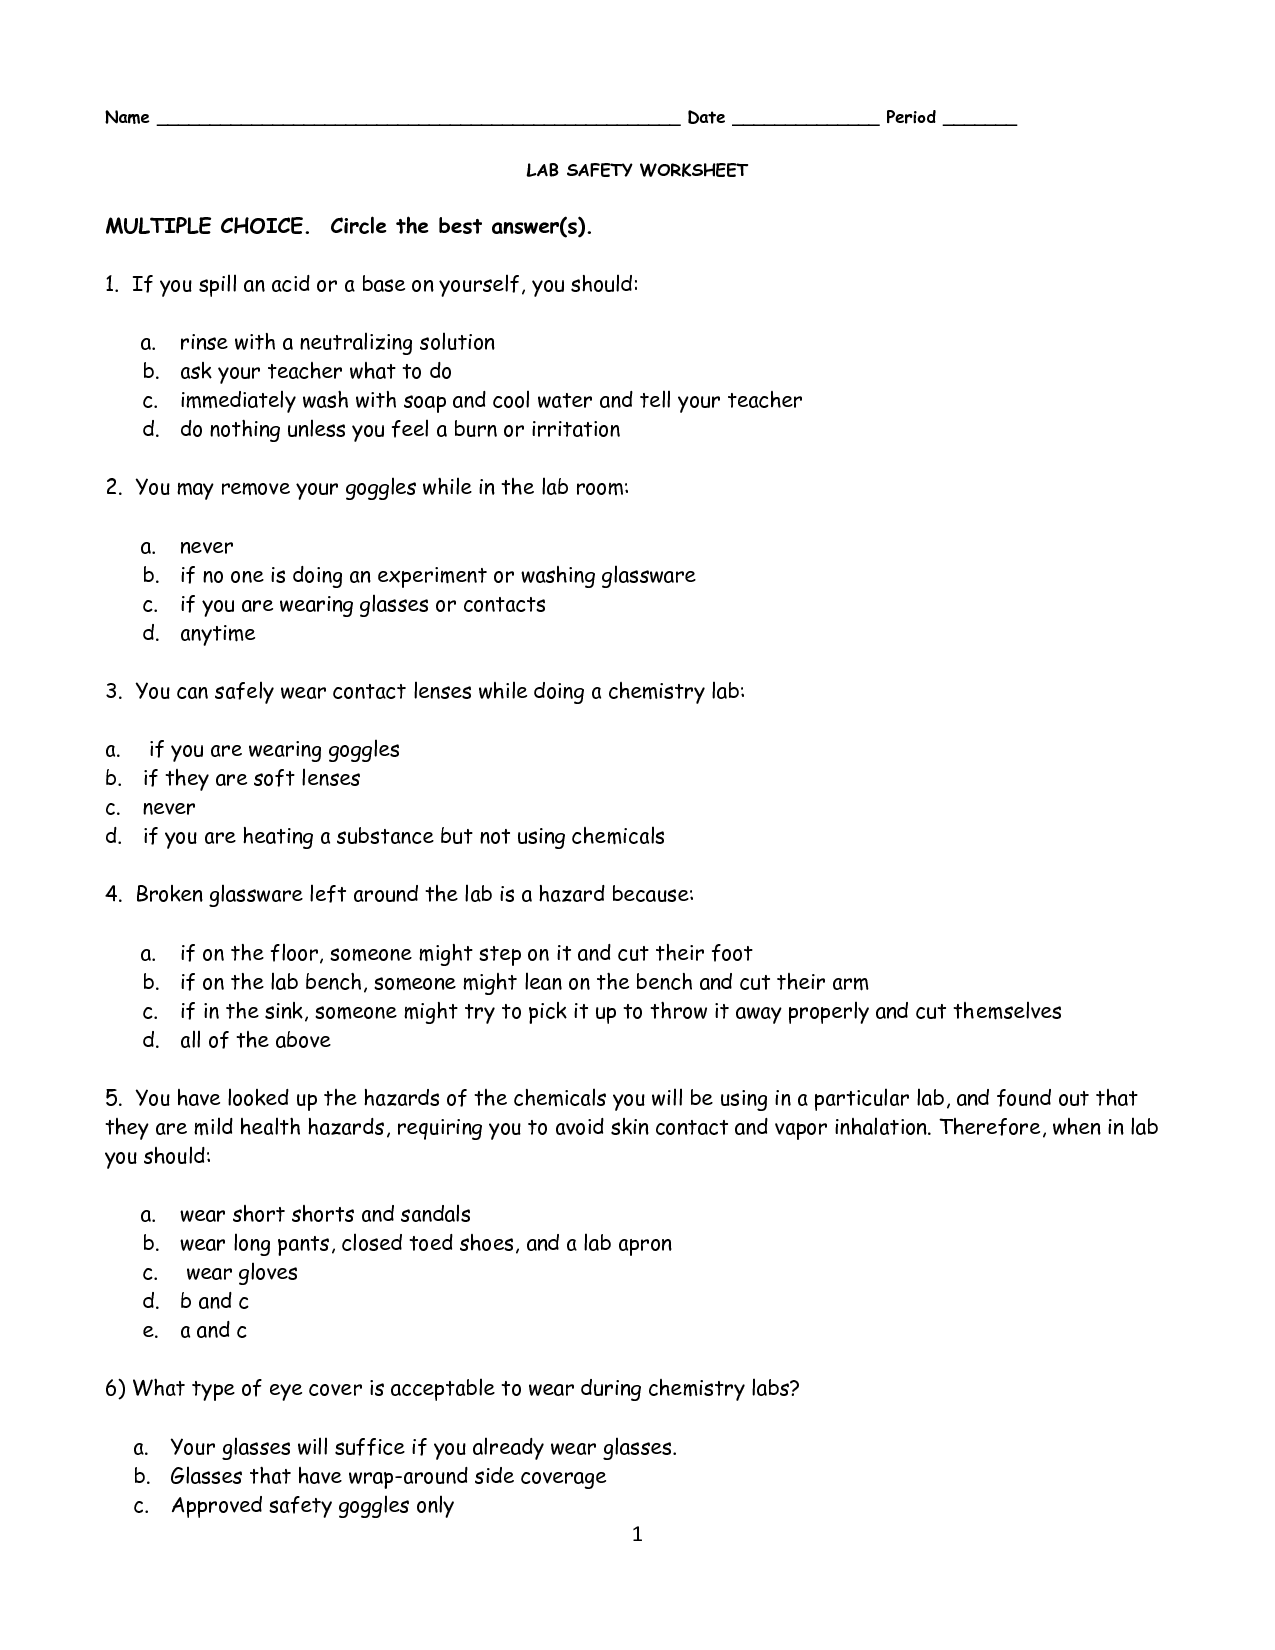 15 Best Images of Types Of Reactions Worksheet Answer Key - Virtual Lab